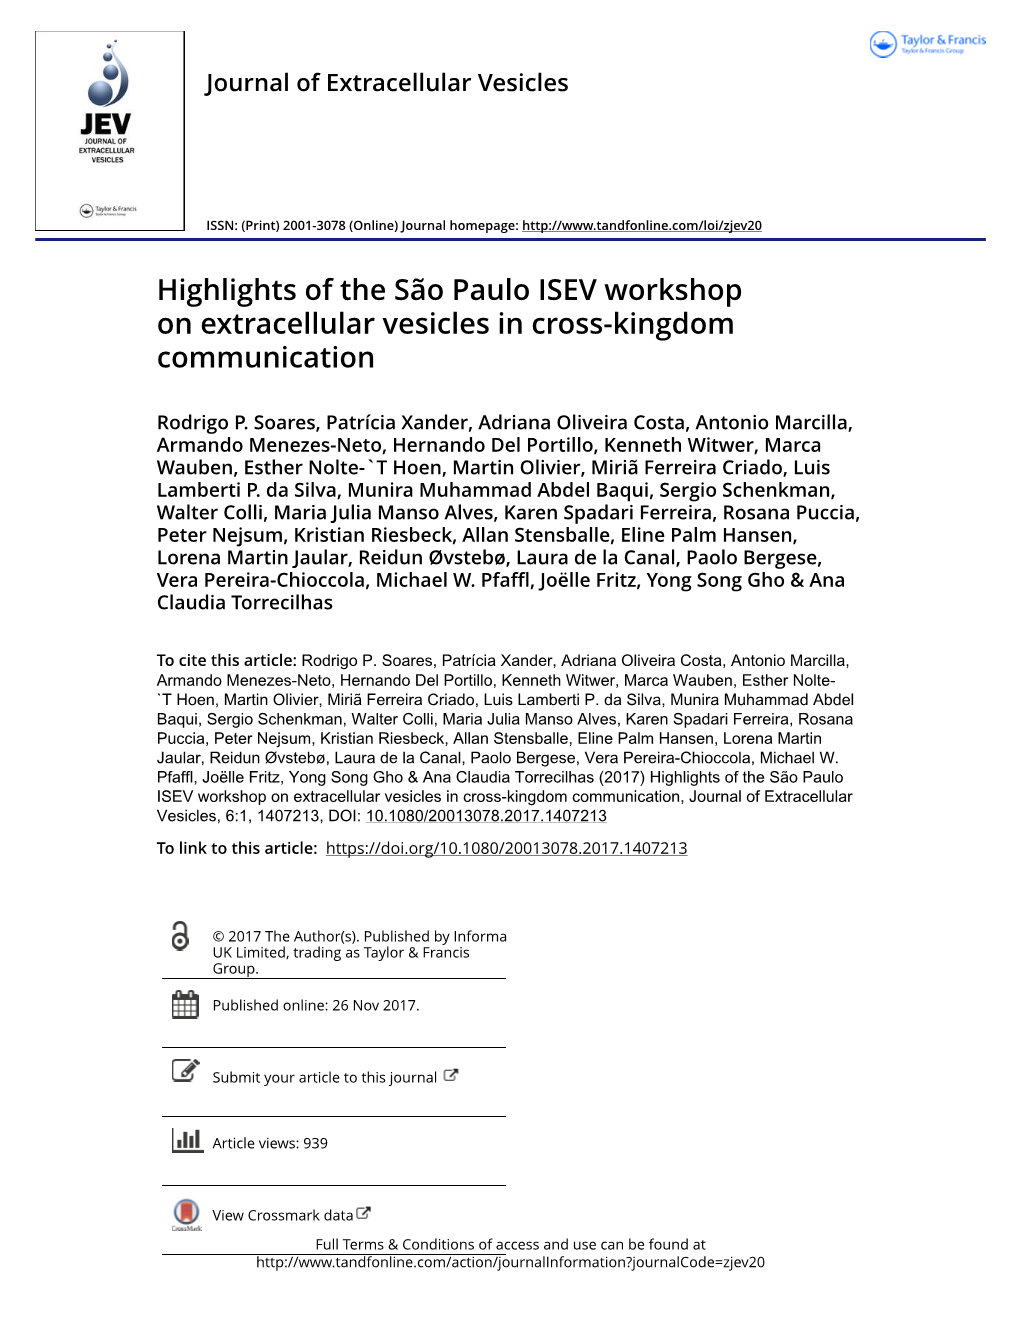 Highlights of the São Paulo ISEV Workshop on Extracellular Vesicles in Cross-Kingdom Communication